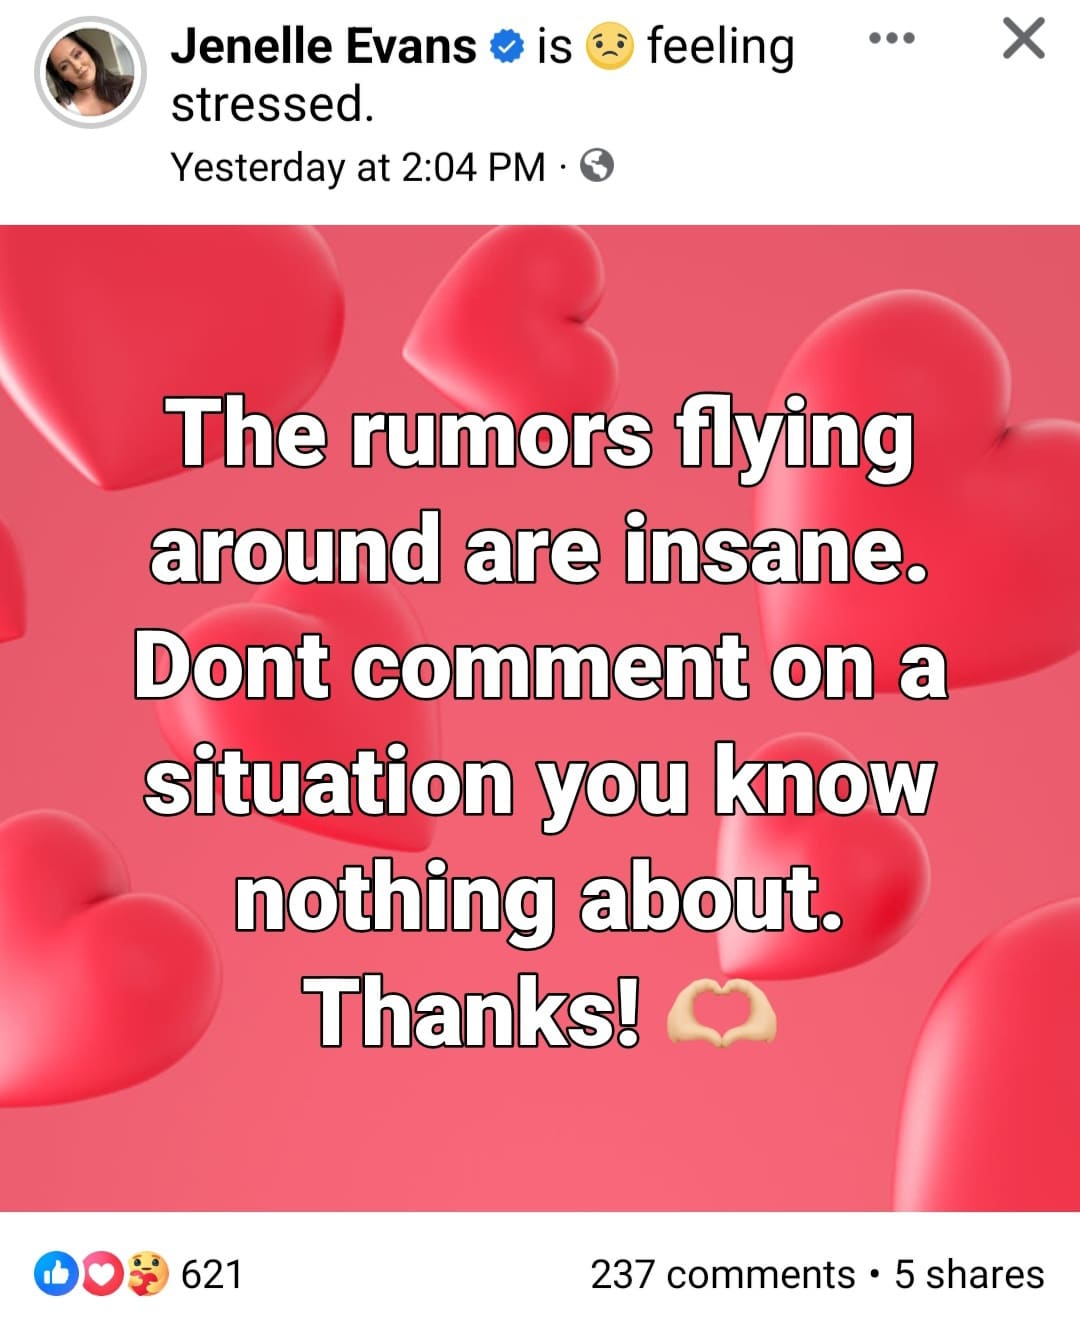 jenelle evans posted about rumors surrounding jace's disappearances on facebook